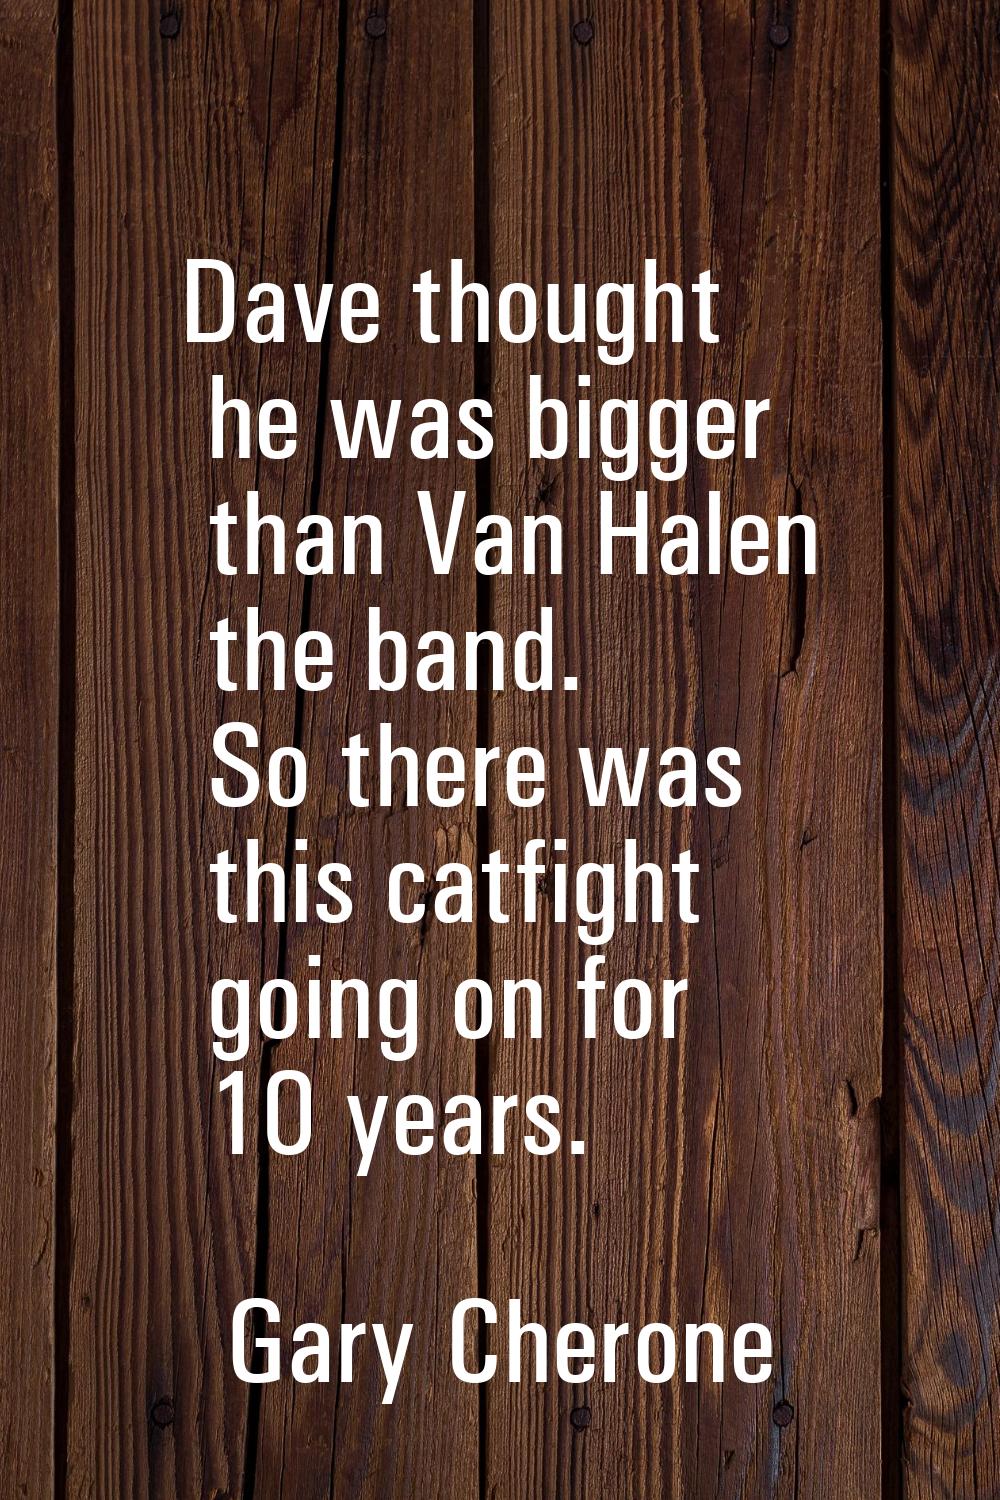 Dave thought he was bigger than Van Halen the band. So there was this catfight going on for 10 year